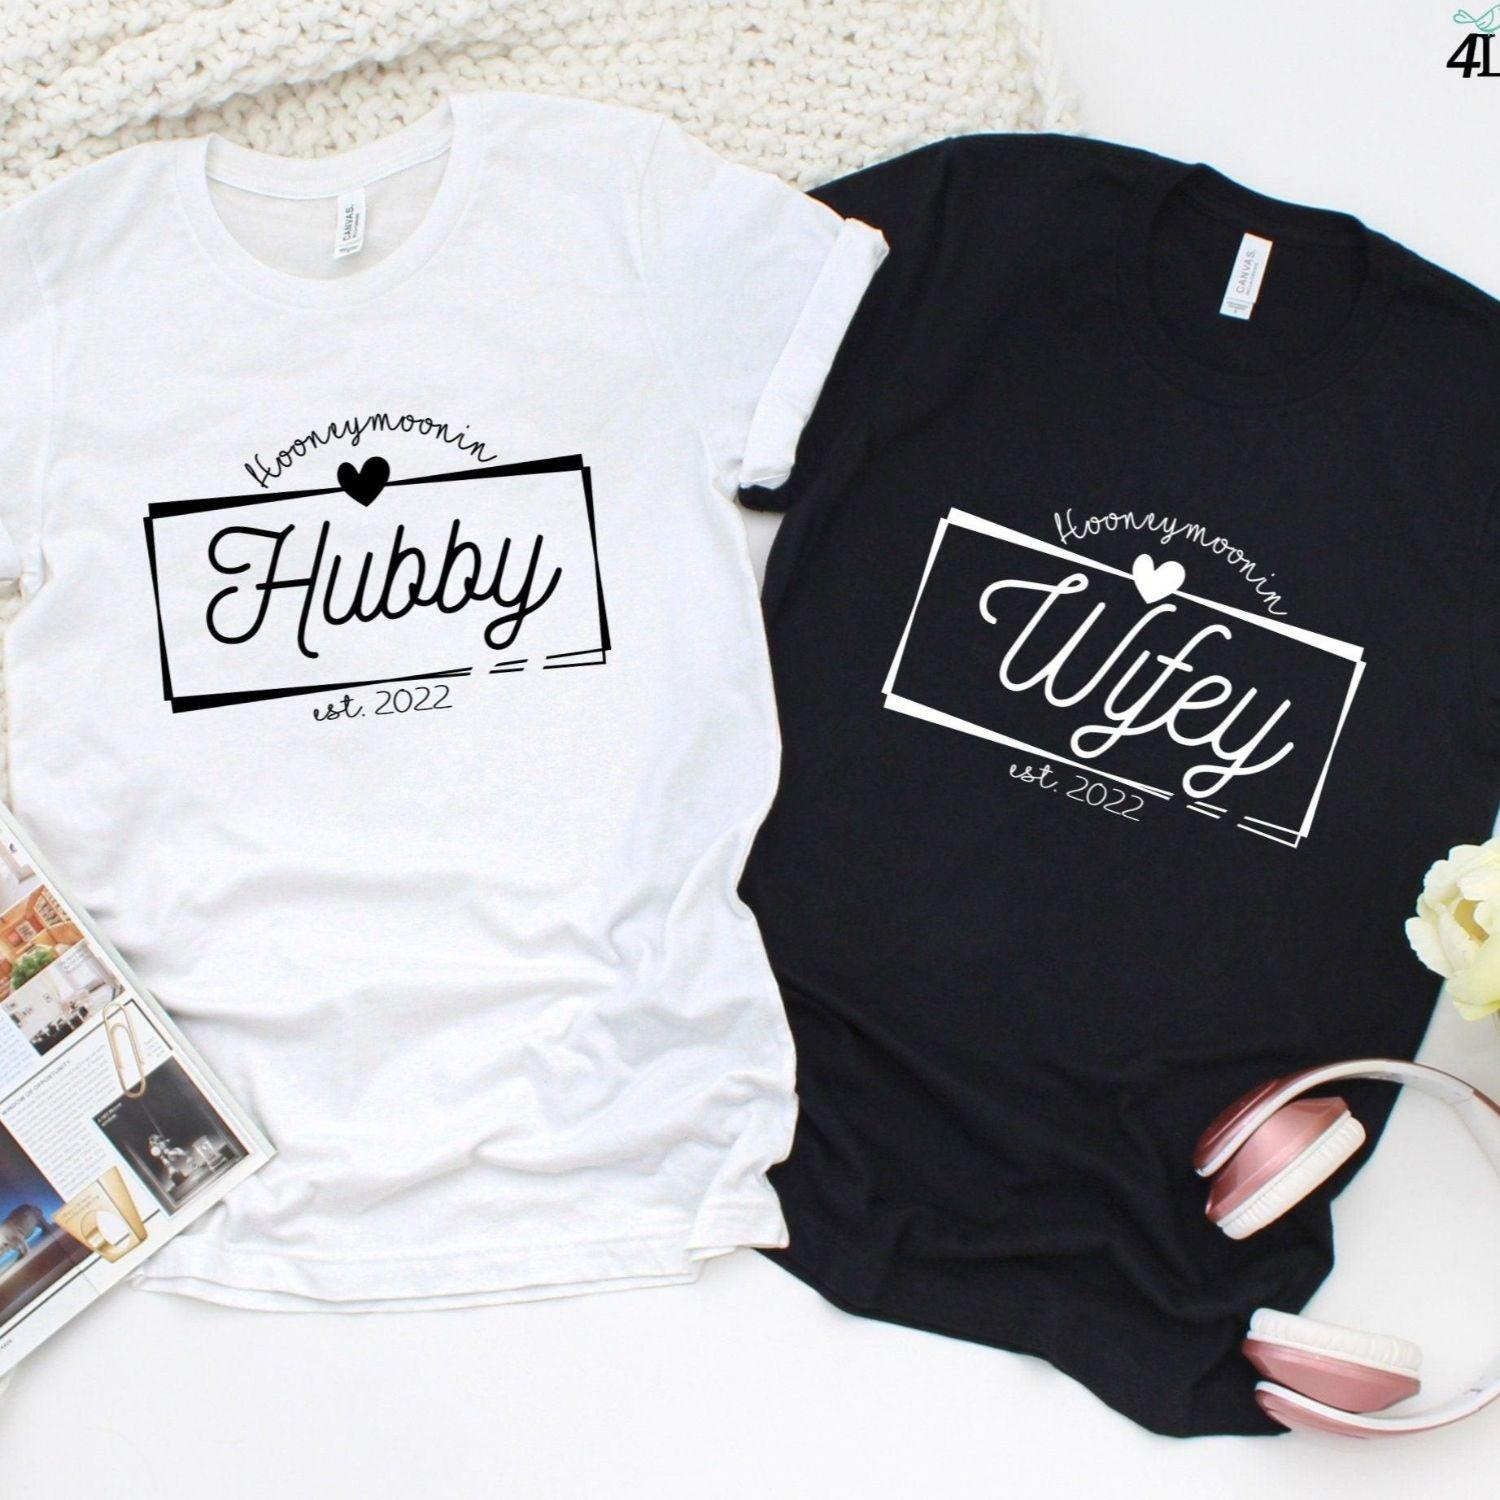 Charming Honeymoon Hubby & Wifey Custom Date Matching Outfits | Just Married & Engaged Duo Sets - 4Lovebirds